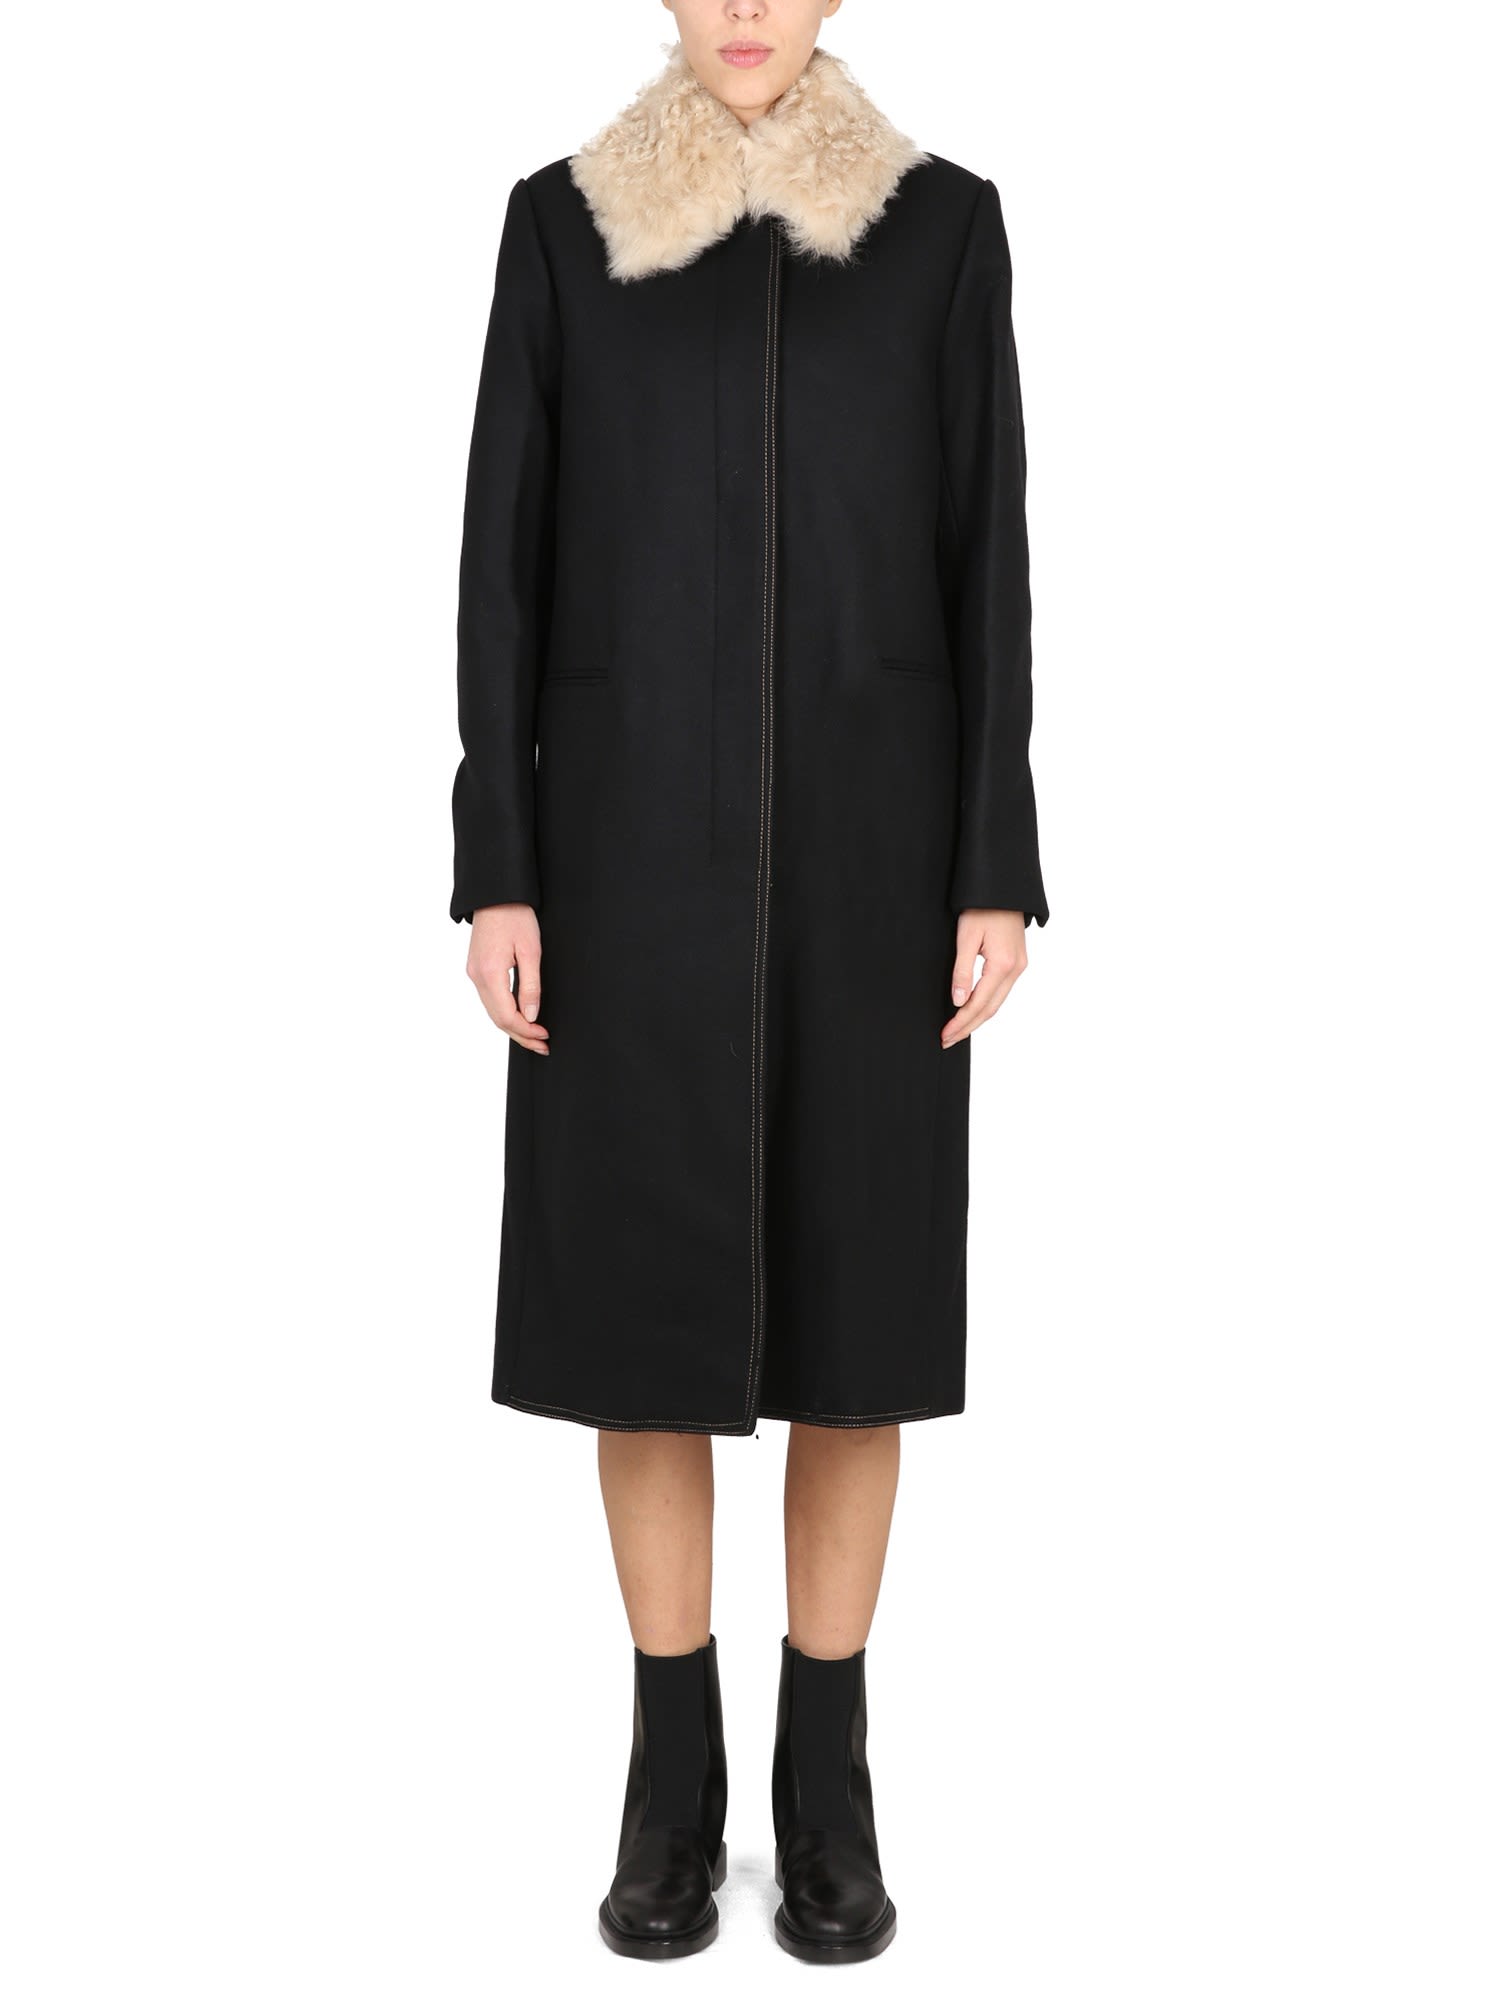 HELMUT LANG COAT WITH SHERLING COLLAR